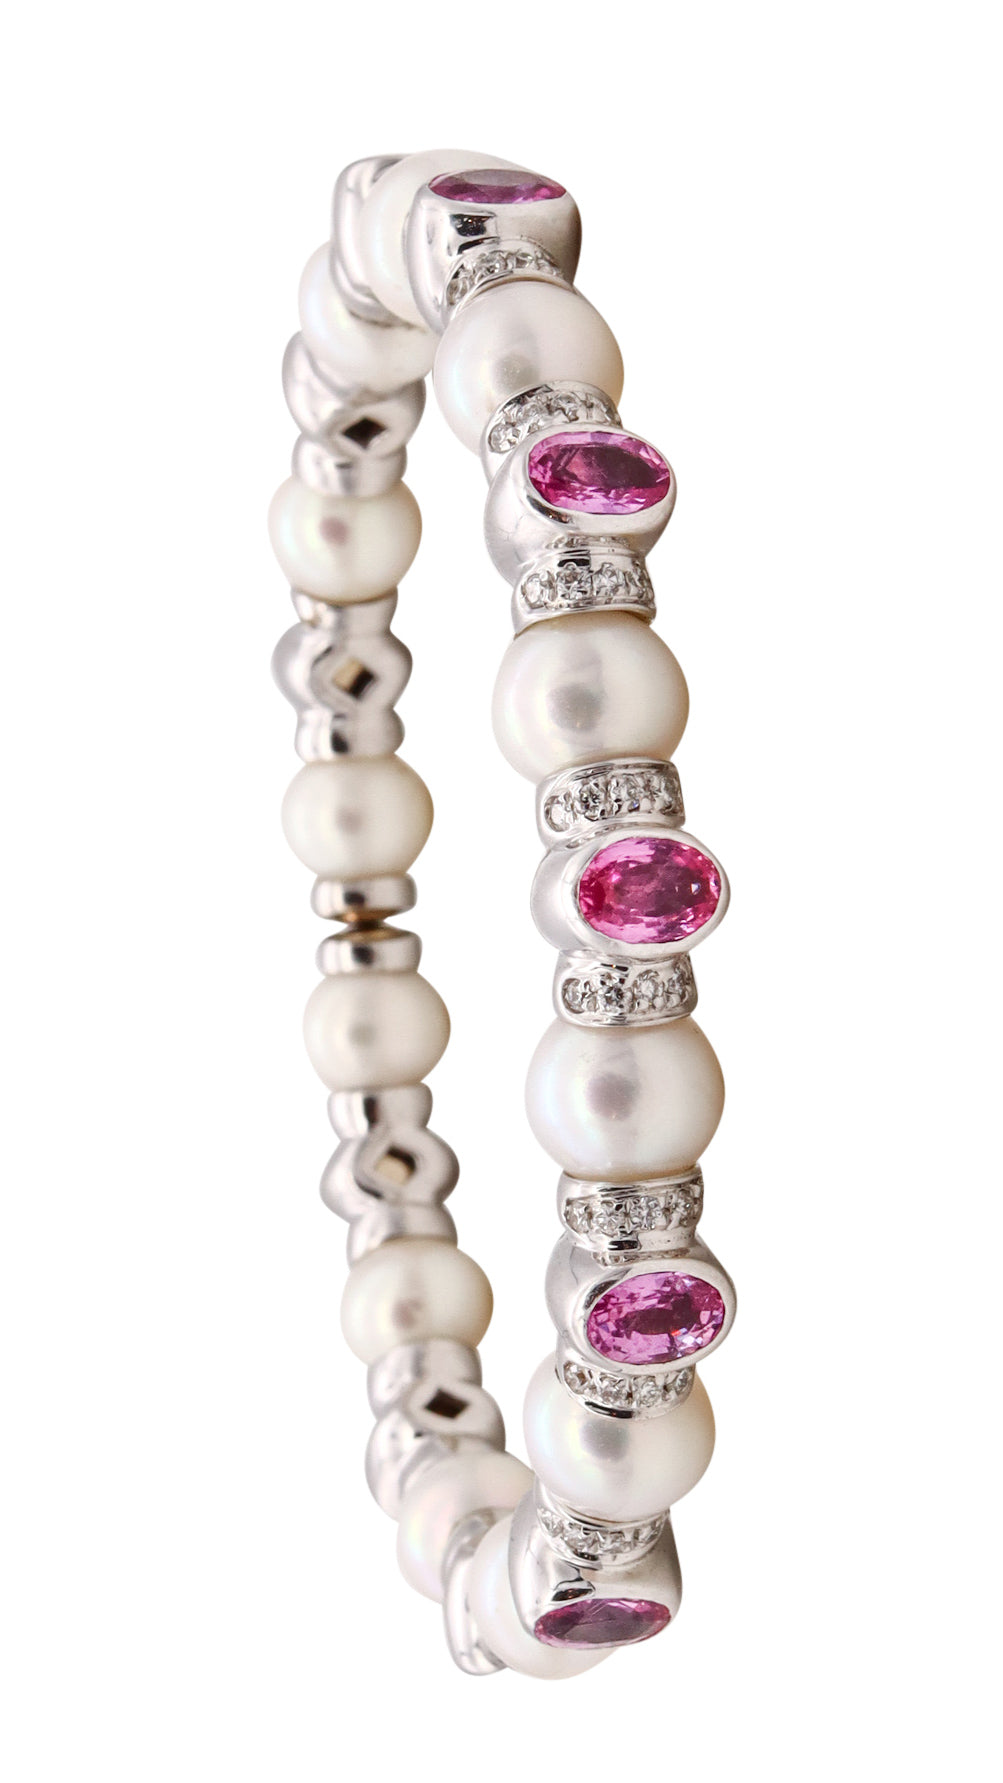 *Modern Akoya pearls cuff bracelet in 18 kt white gold with 6.15 Cts in diamonds and pink sapphires